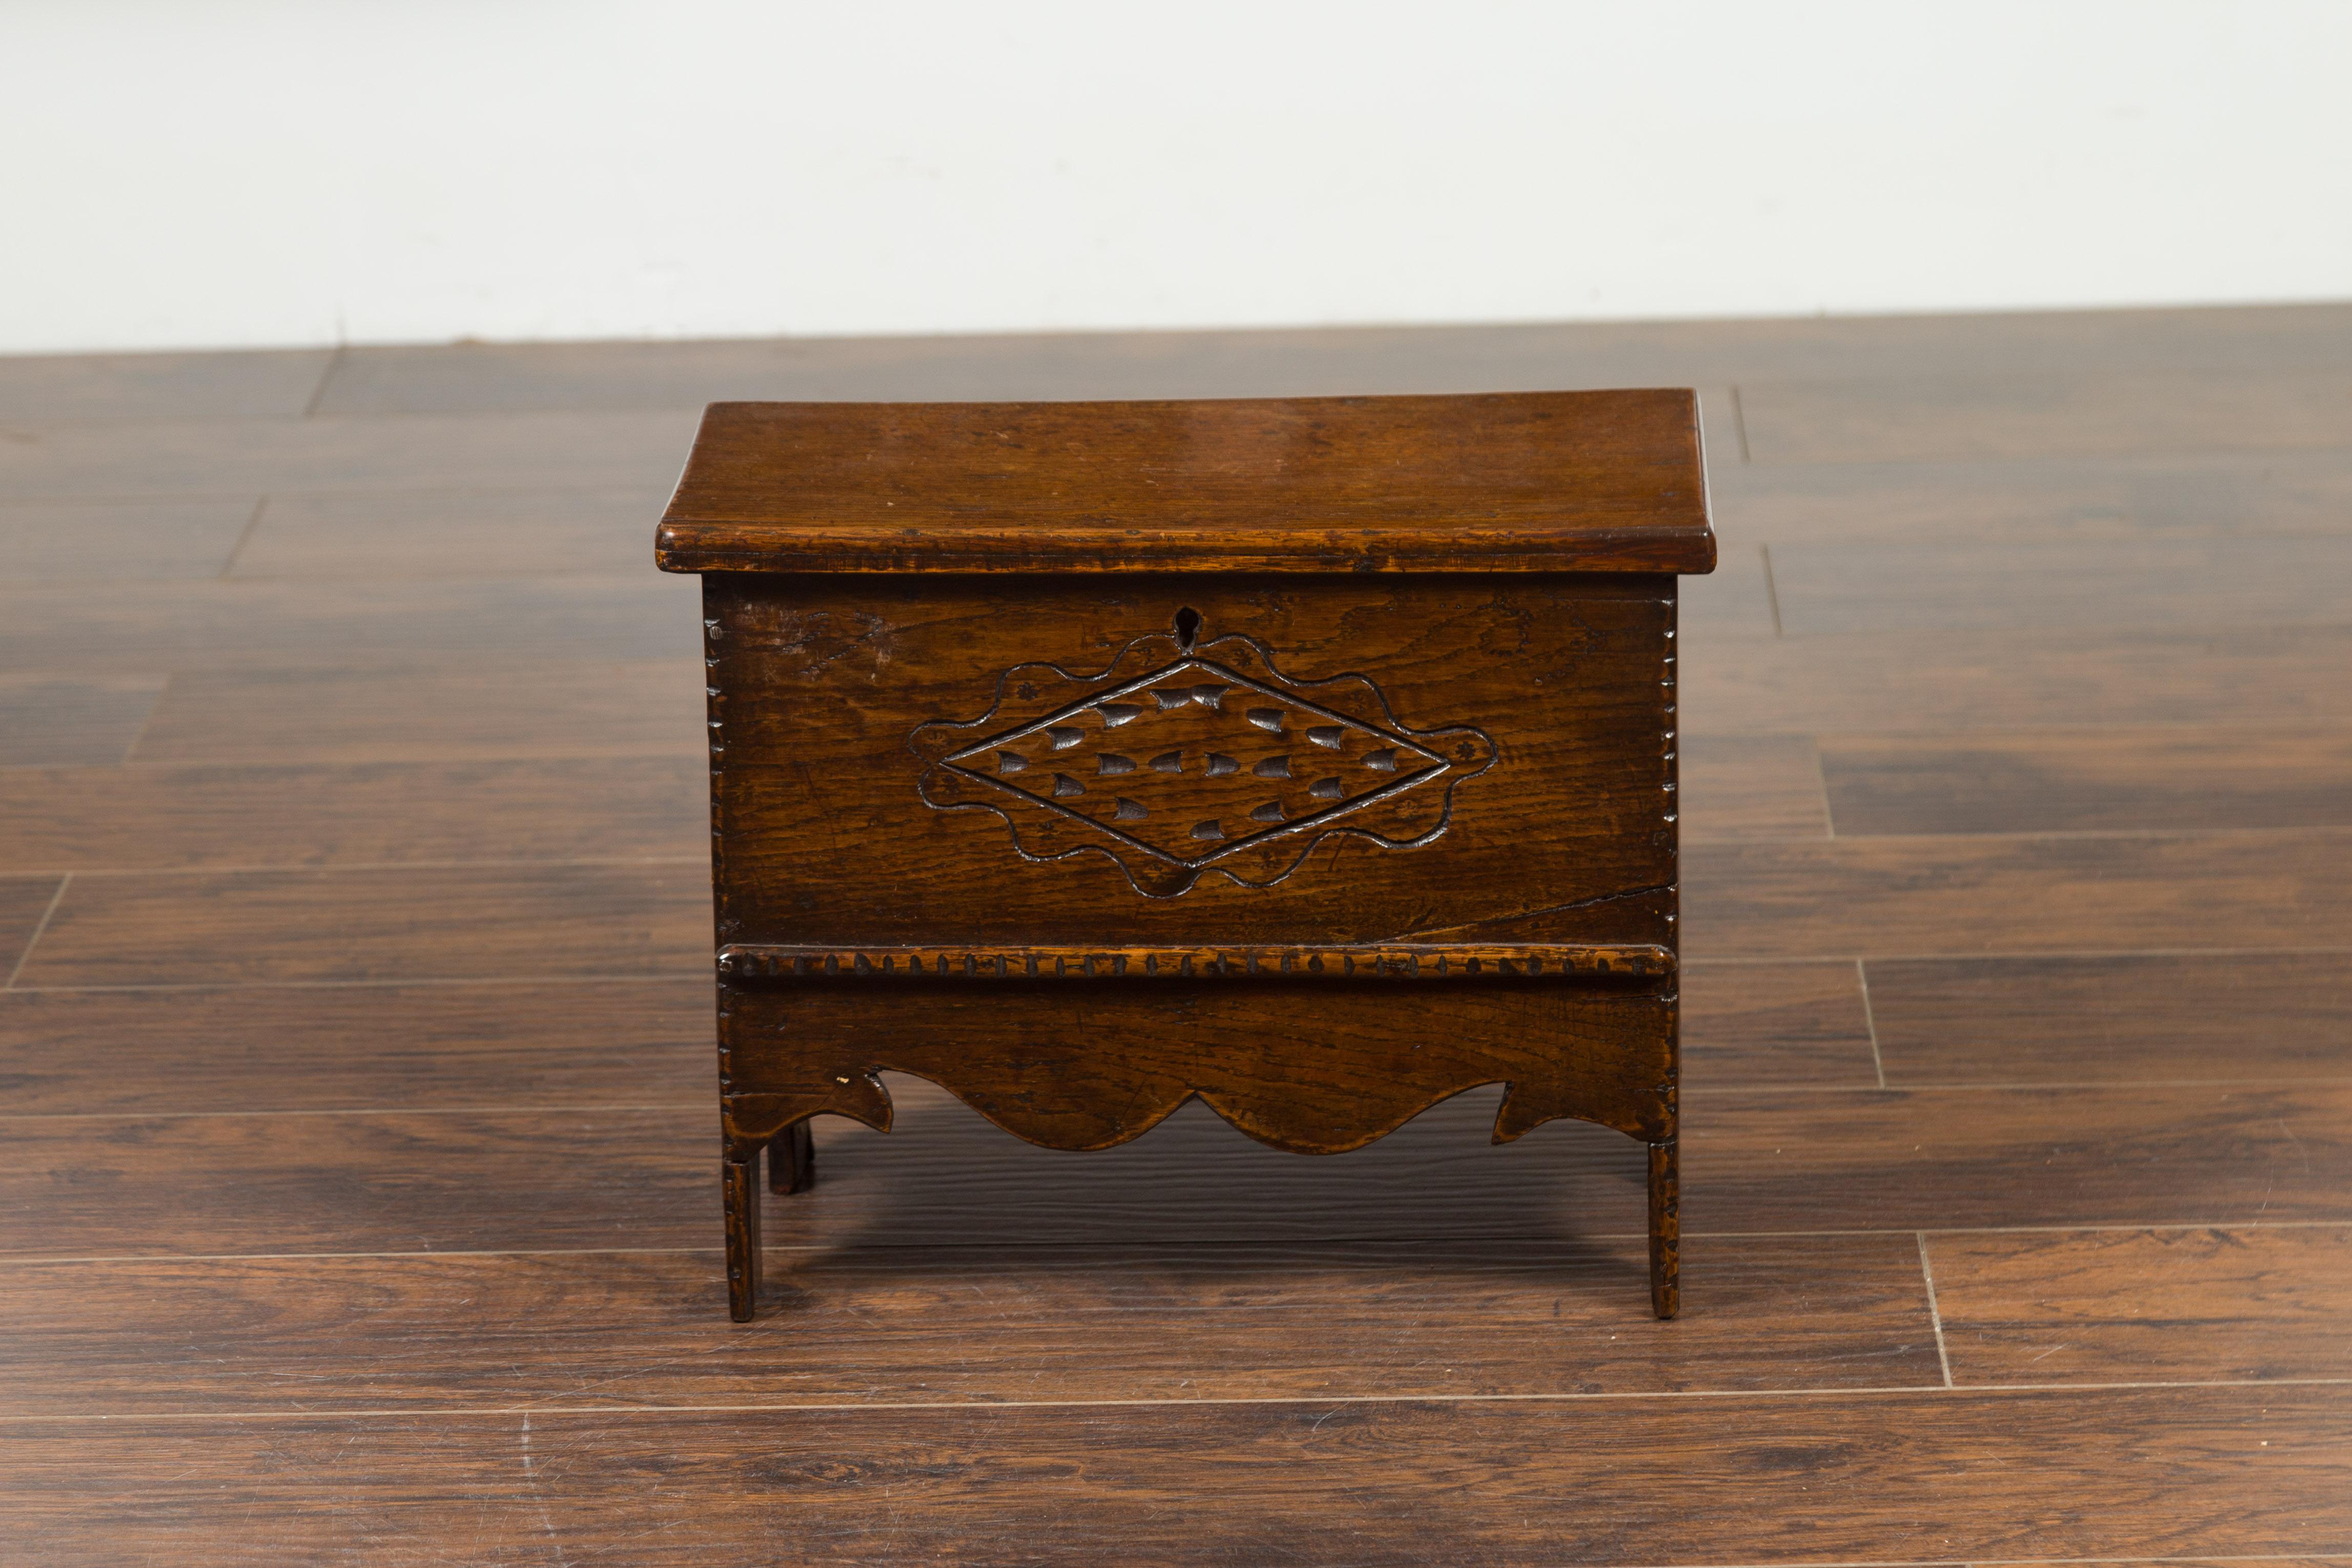 An English Georgian period mini oak coffer from the early 19th century, with carved motifs and scalloped apron. Born in England during the reign of King George III, this mini coffer features a lift top revealing a small storage area, resting upon a